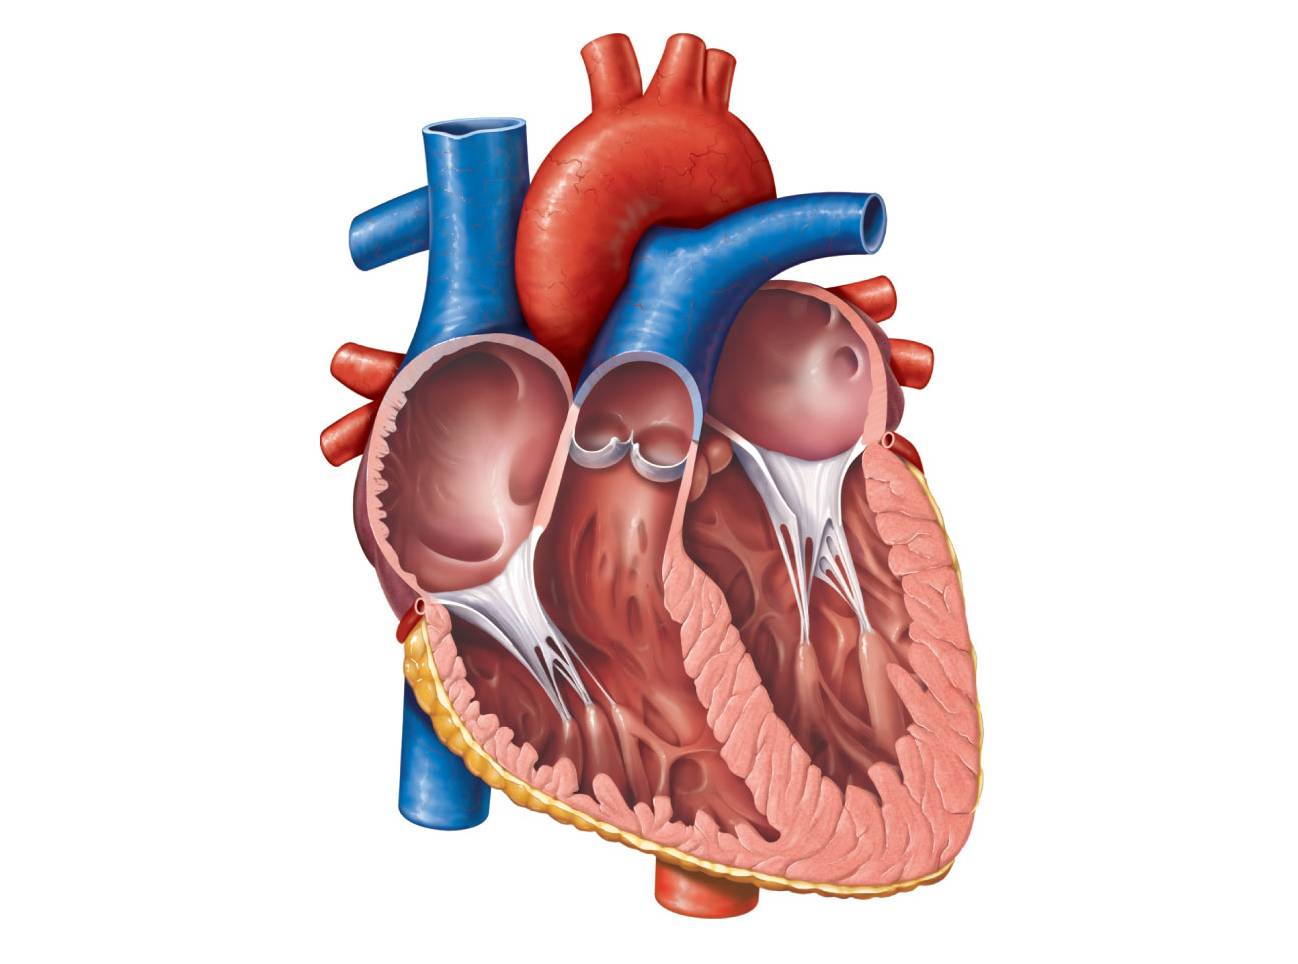 Heart Diagram Unlabeled   Cliparts Co